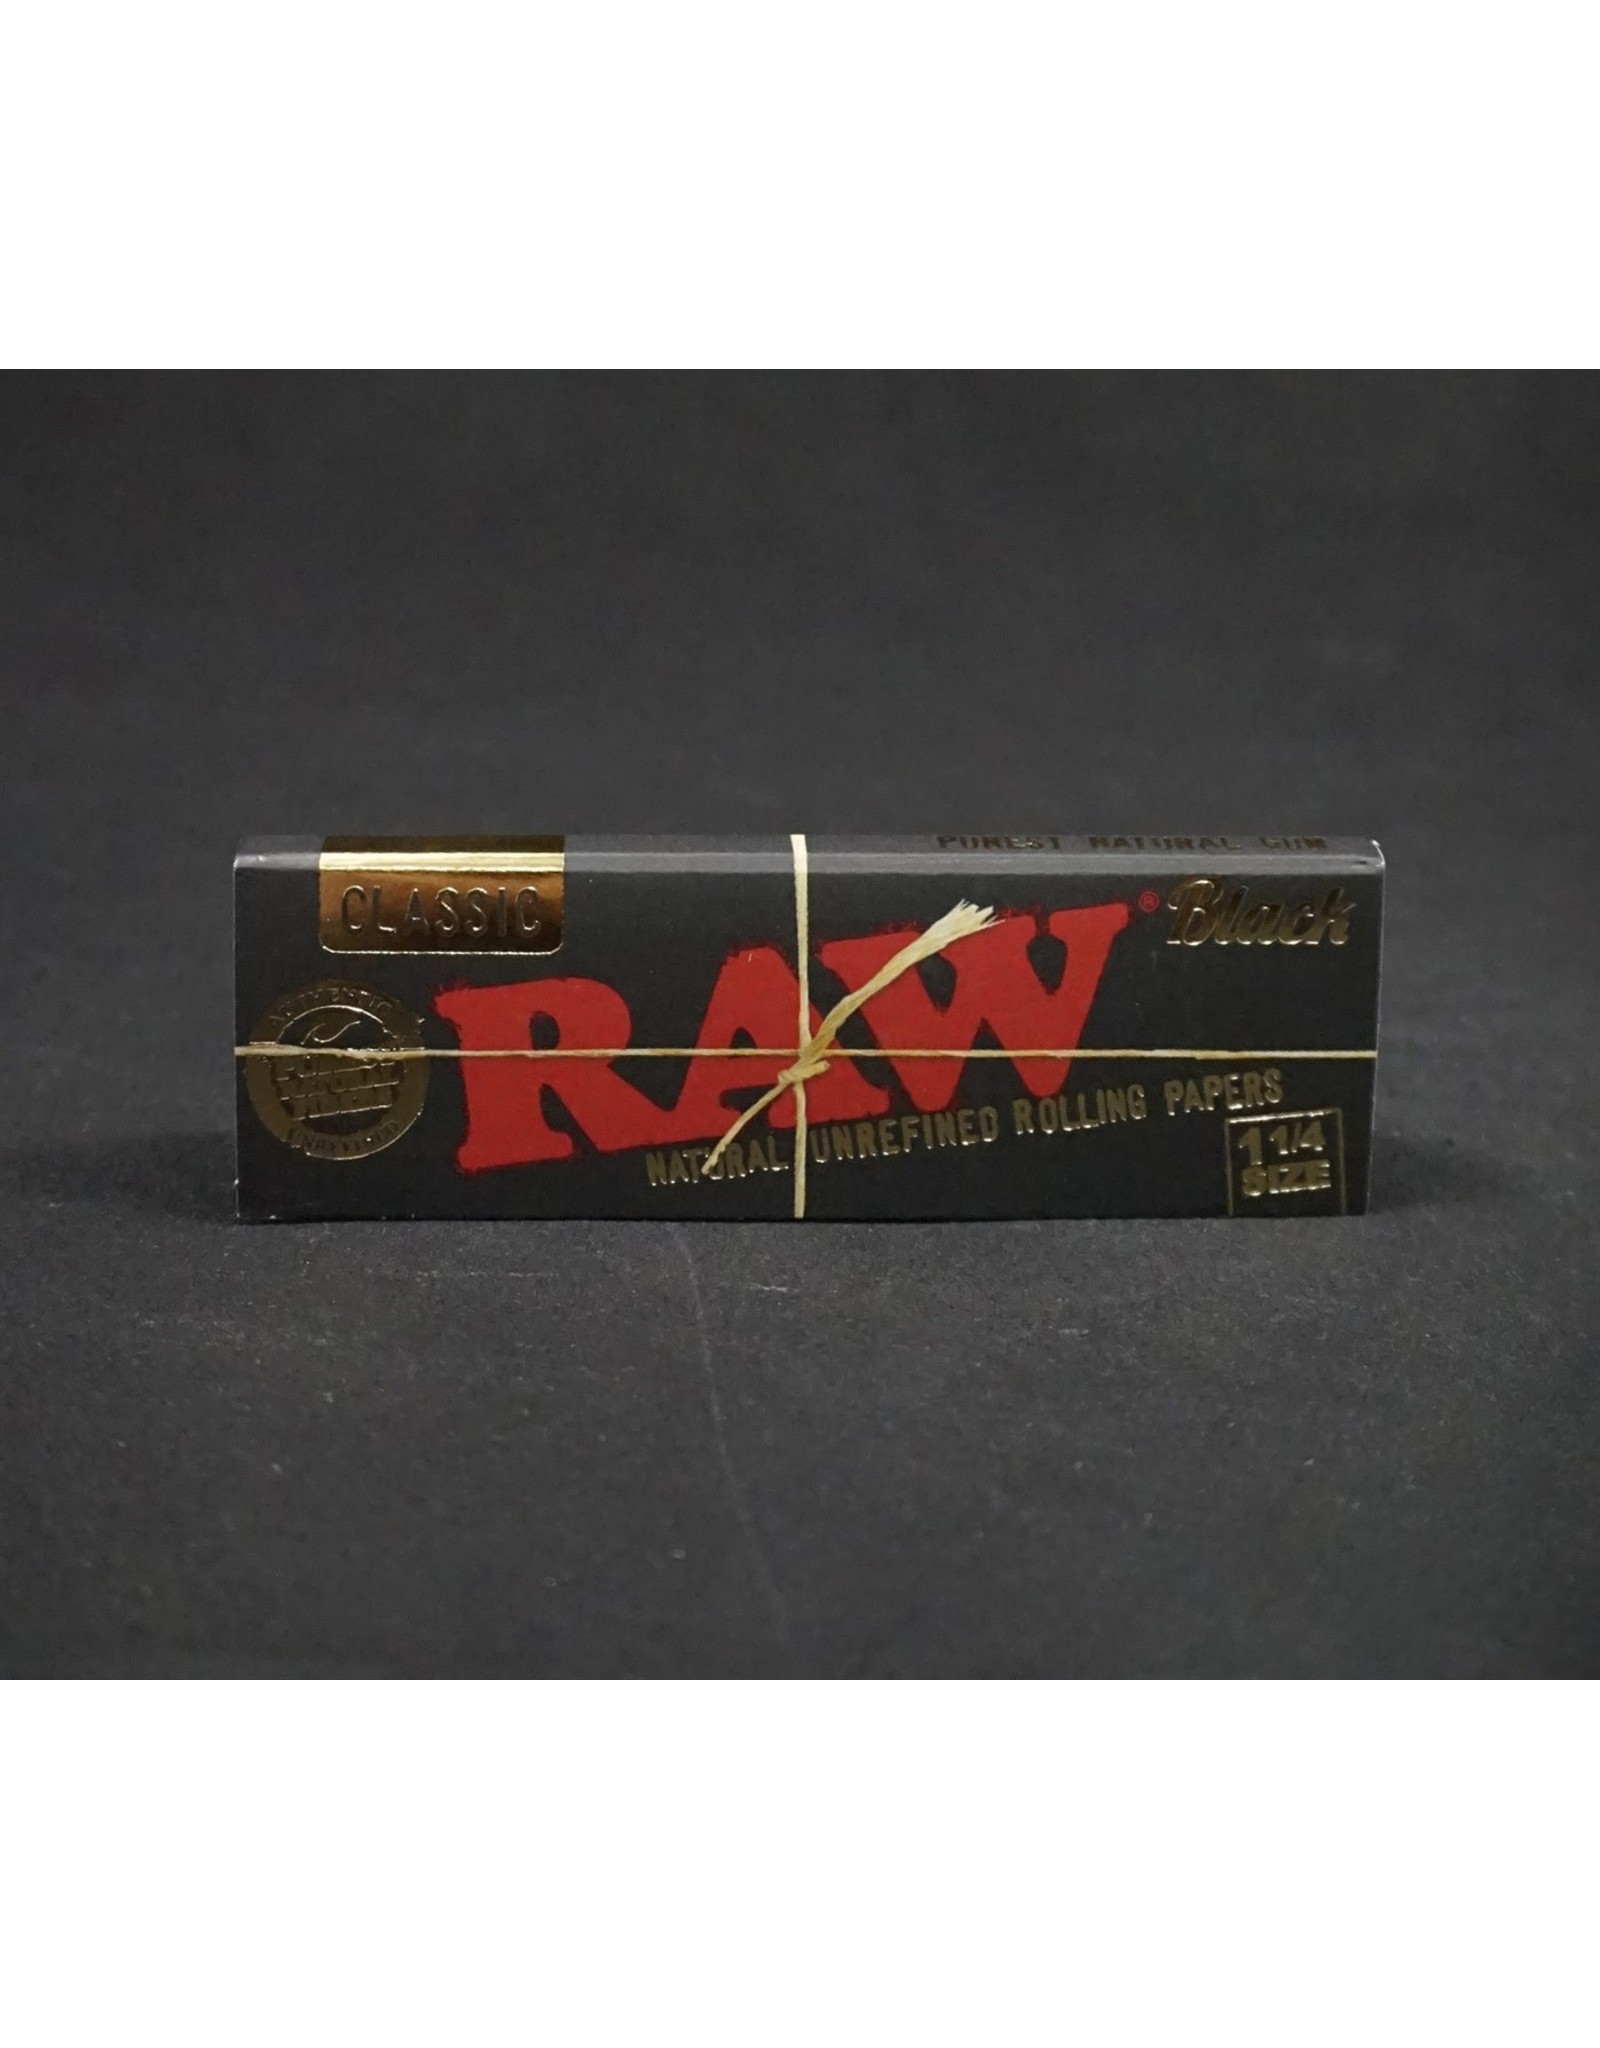 Raw Raw Black Papers 1.25